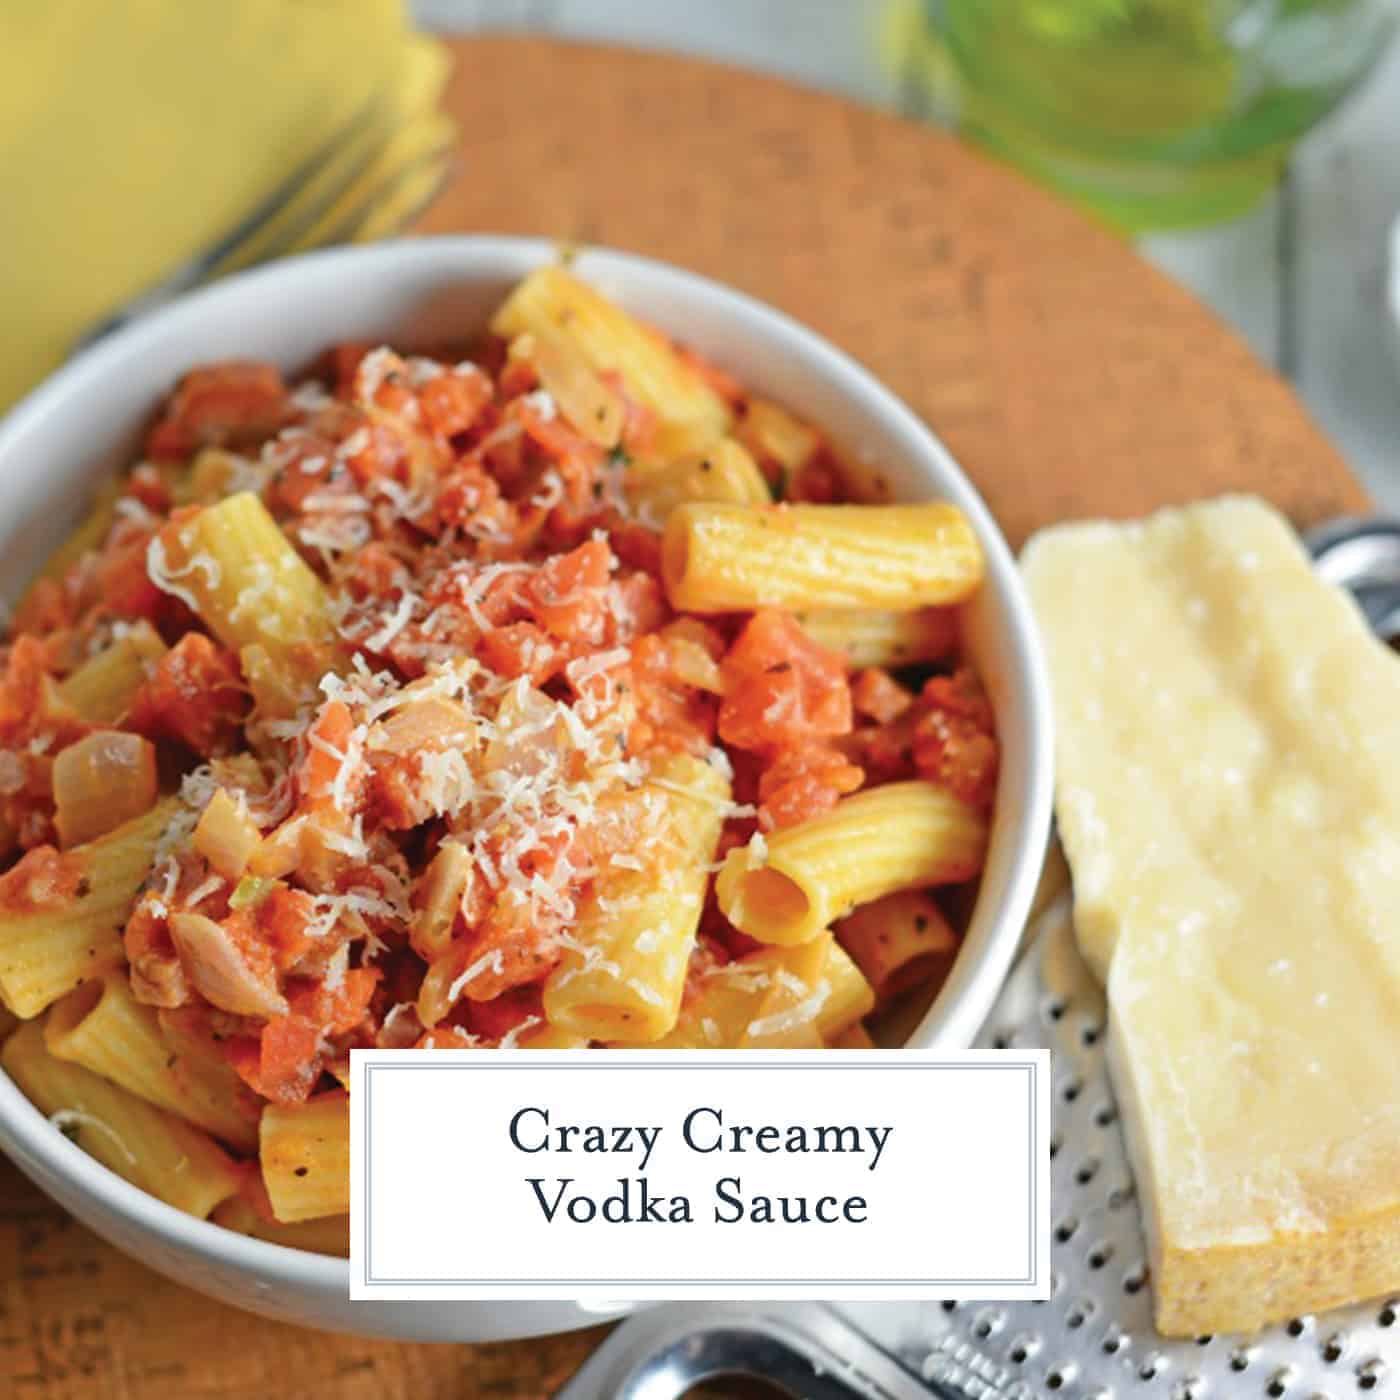 Creamy Vodka Sauce is an easy pasta sauce recipe pancetta, tomatoes and cream. Serve over your favorite pasta like Penne alla Vodka! #vokdasauce #penneallavodka www.savoryexperiments.com 